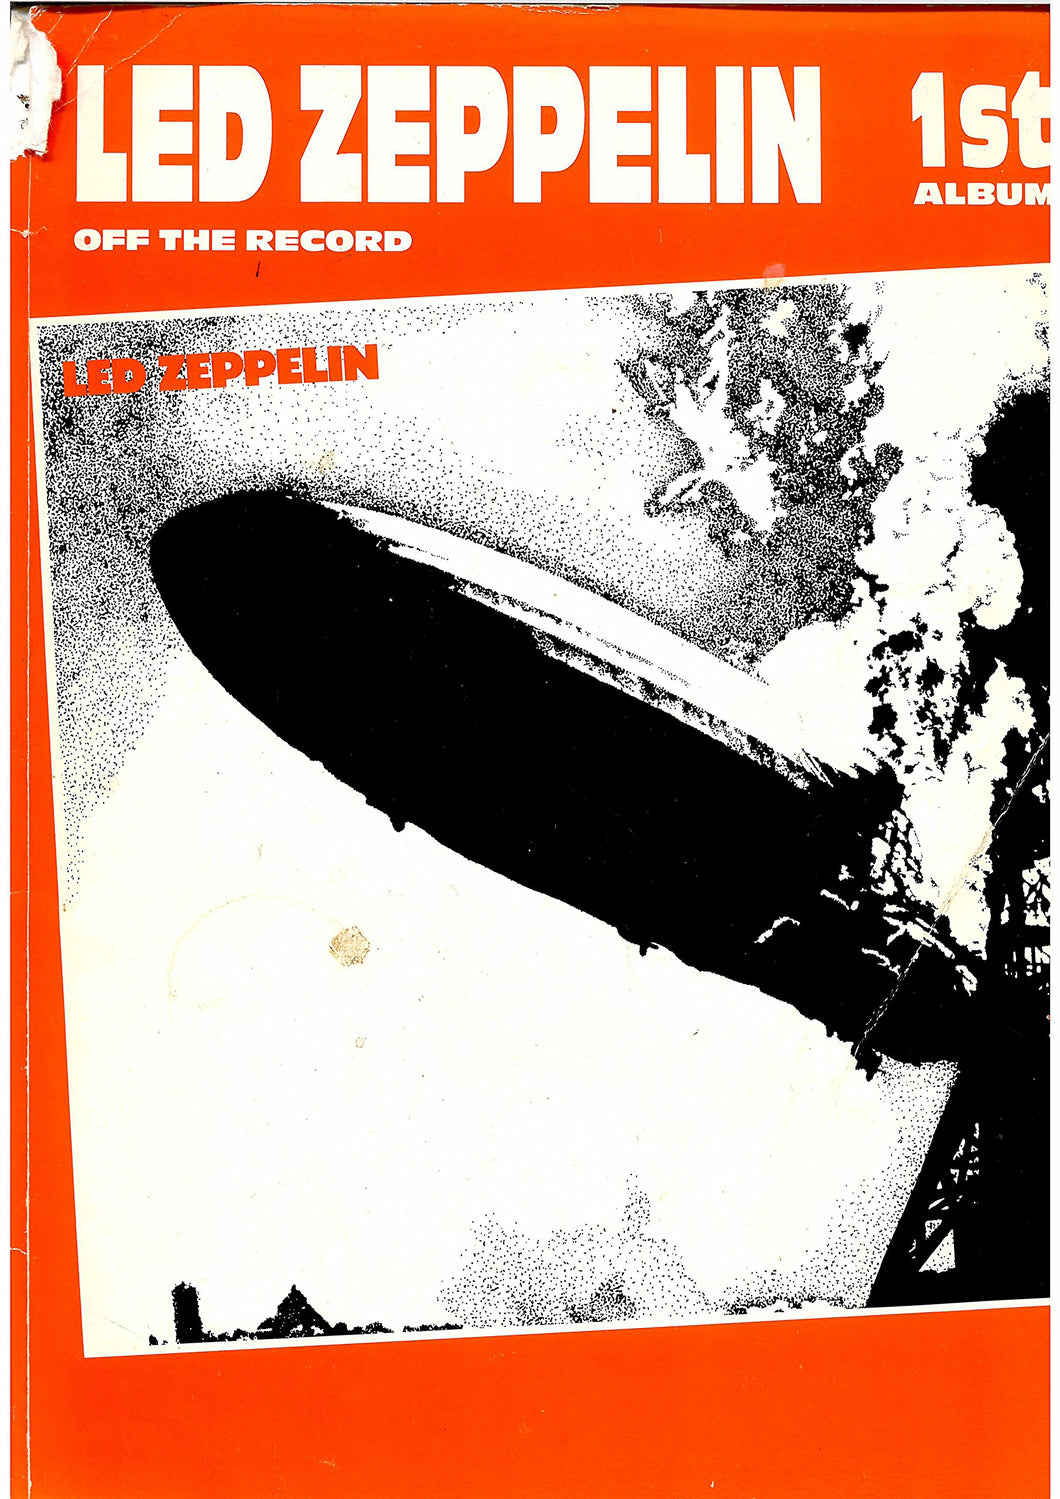 Led Zeppelin 1st Album: Off the Record - Full Musical Score including Guitar Tablature